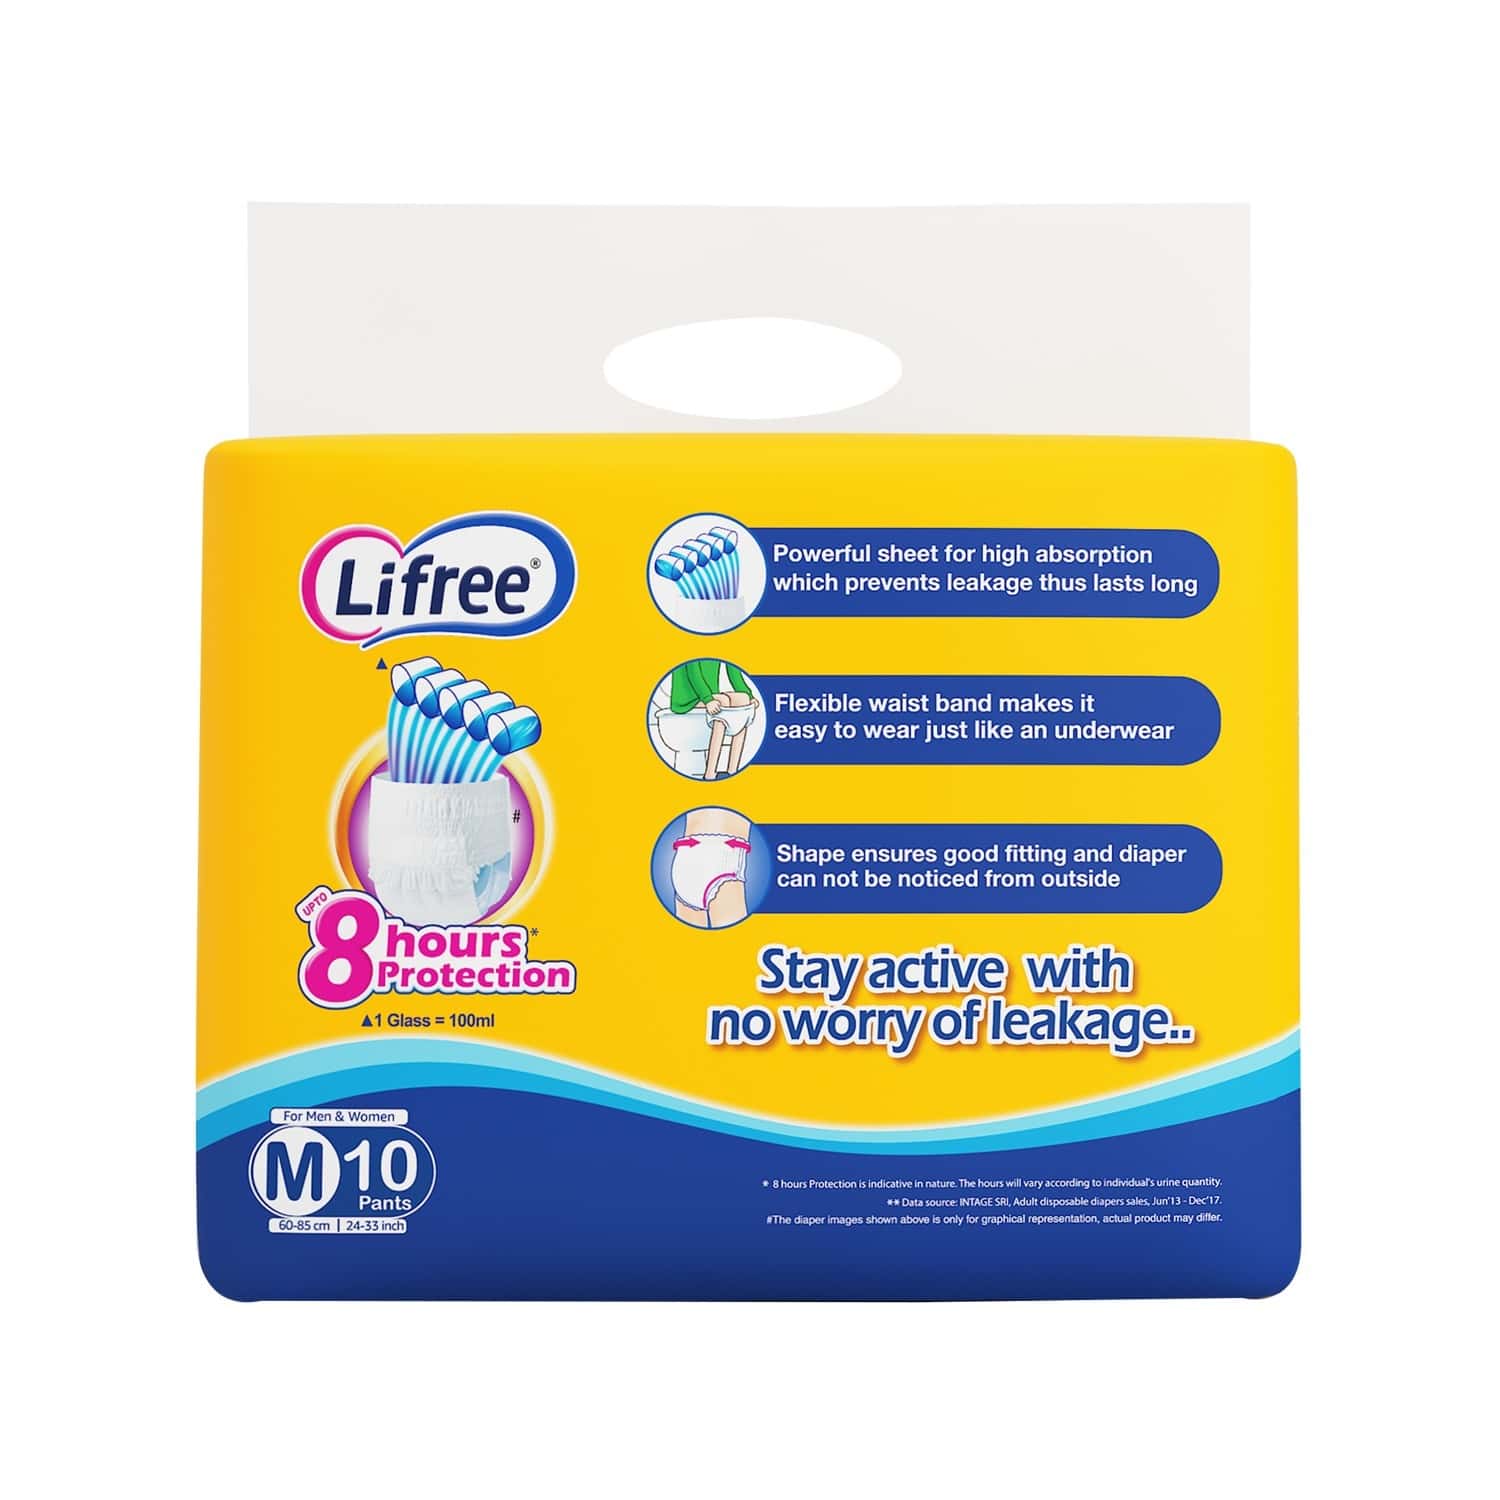 Buy LIFREE Adult Pant Style Diaper Size XL, Set of 2 packs, 10 pcs per pack  Total 20 pcs for waist size 35-49 inches Adult Diapers - XL (20 Pieces)  Online at Best Prices in India - JioMart.